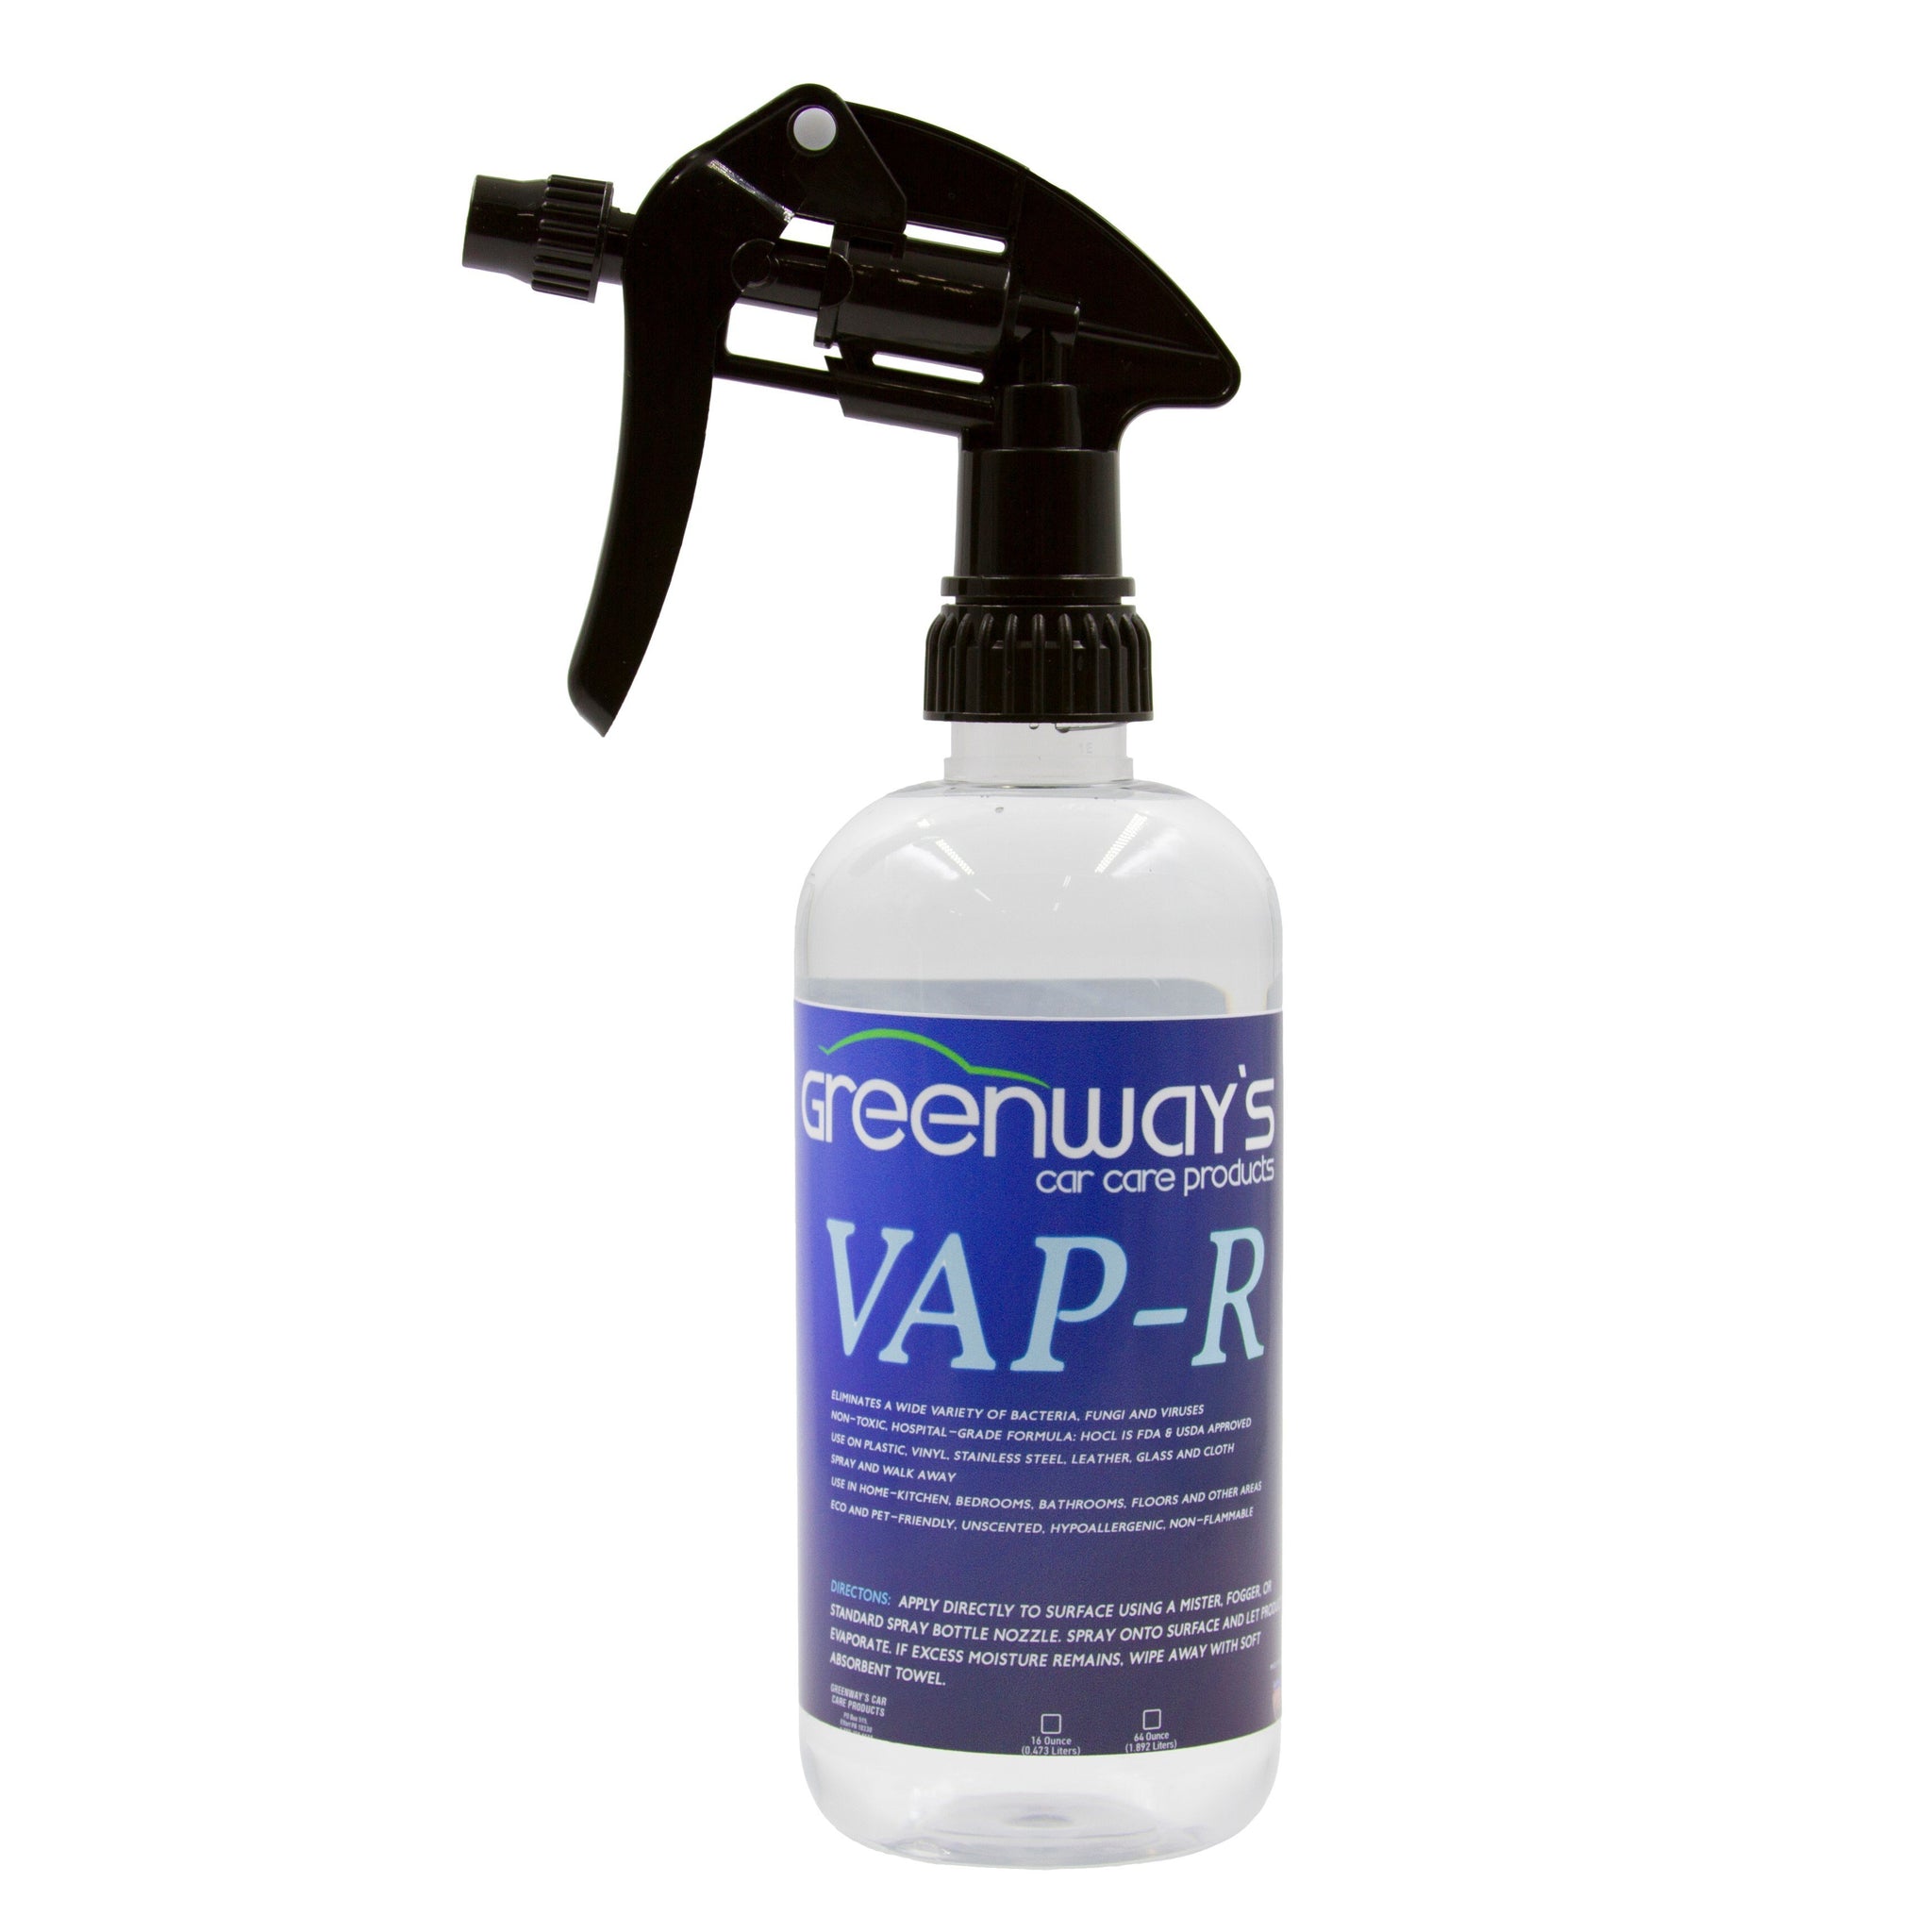 Greenway’s VAP-R antibacterial disinfecting and sanitizing spray with FDA-approved HOCl, 16 ounces.